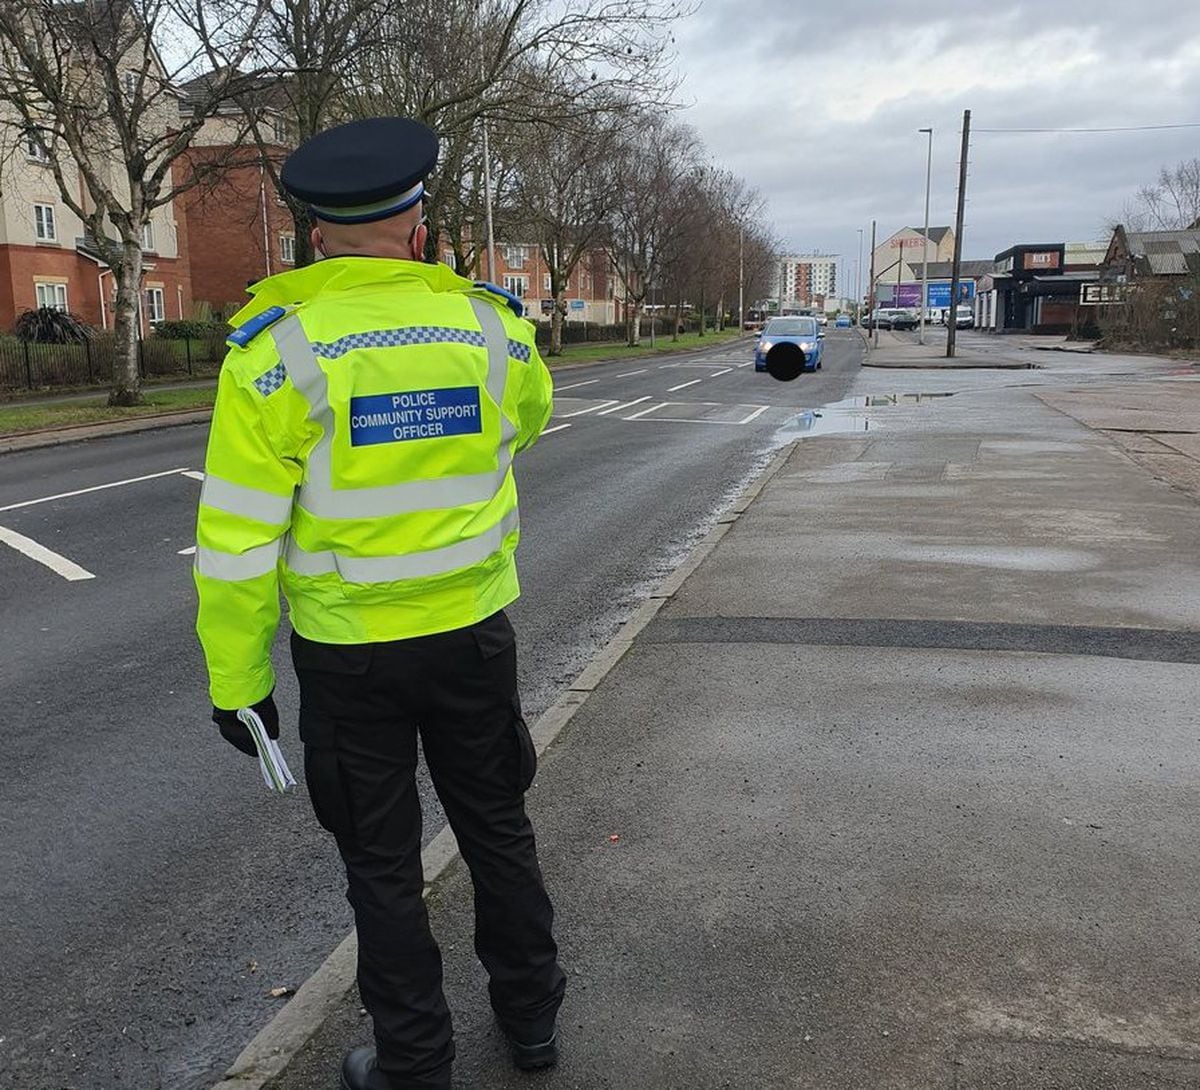 Police officers conducted a speed check on Holyhead Road in Wednesbury. Photo: Wednesbury Police